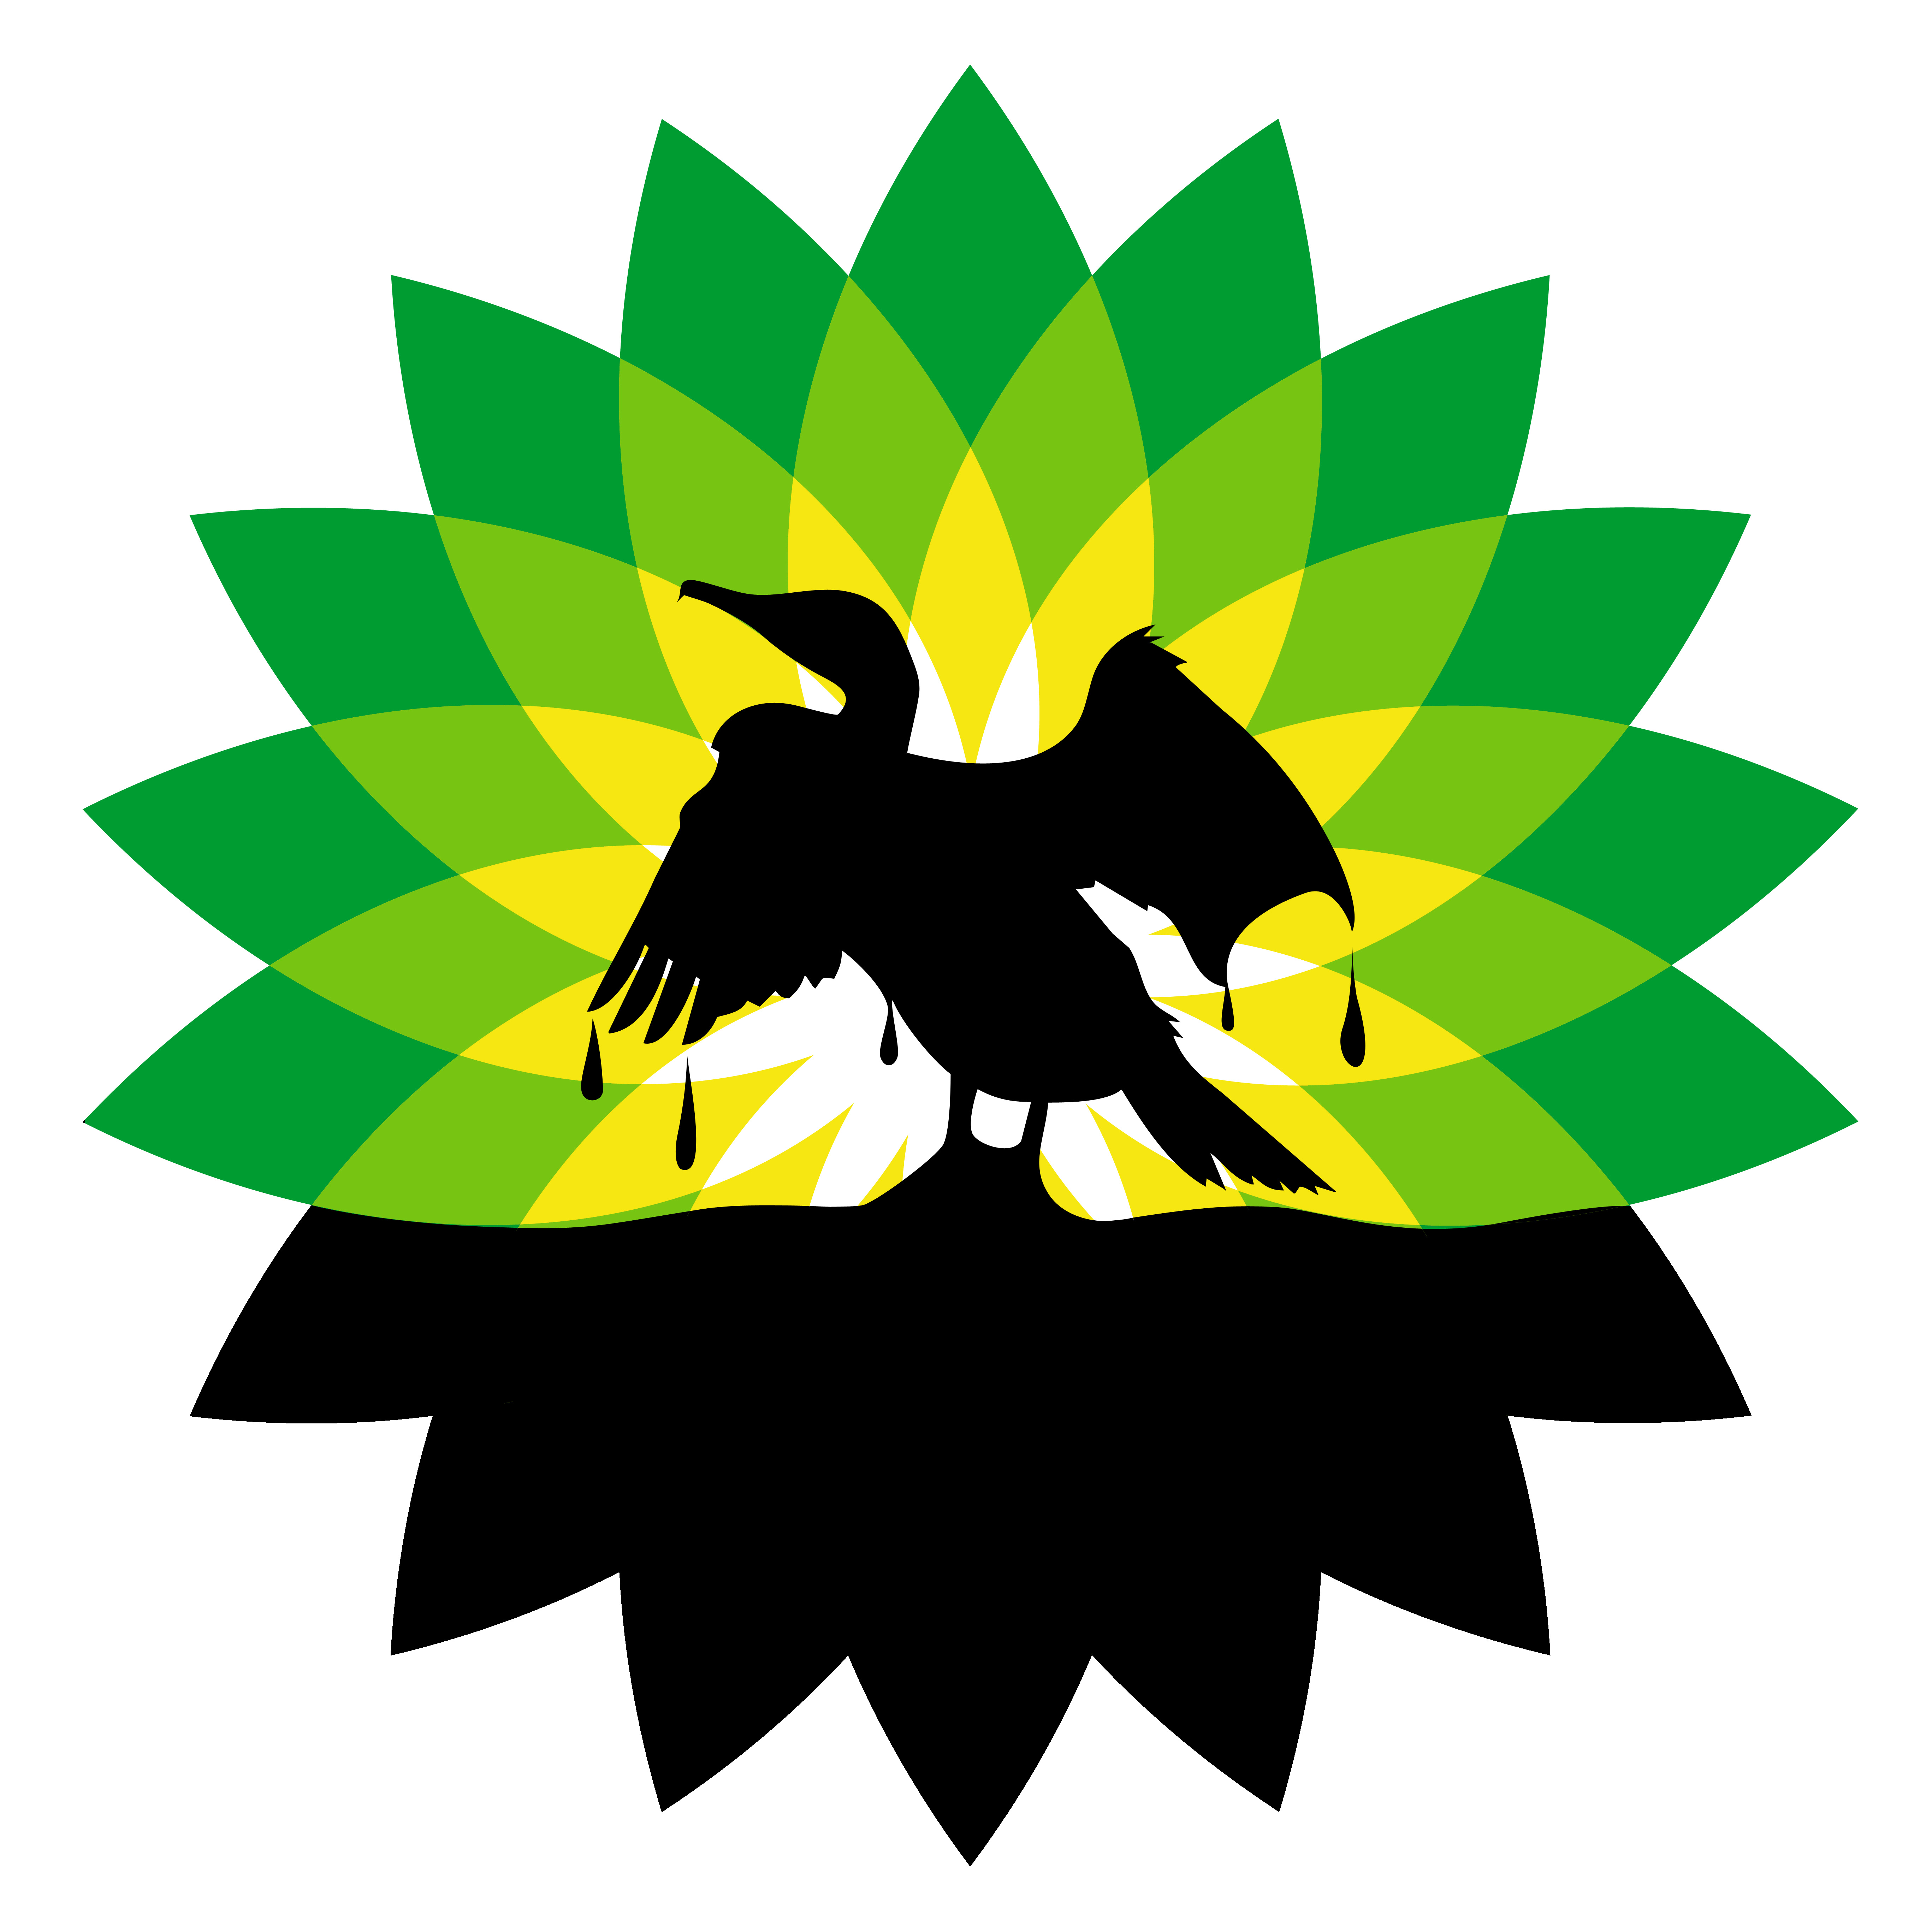 We've got a new logo for BP. Now let's spread it. | Greenpeace UK